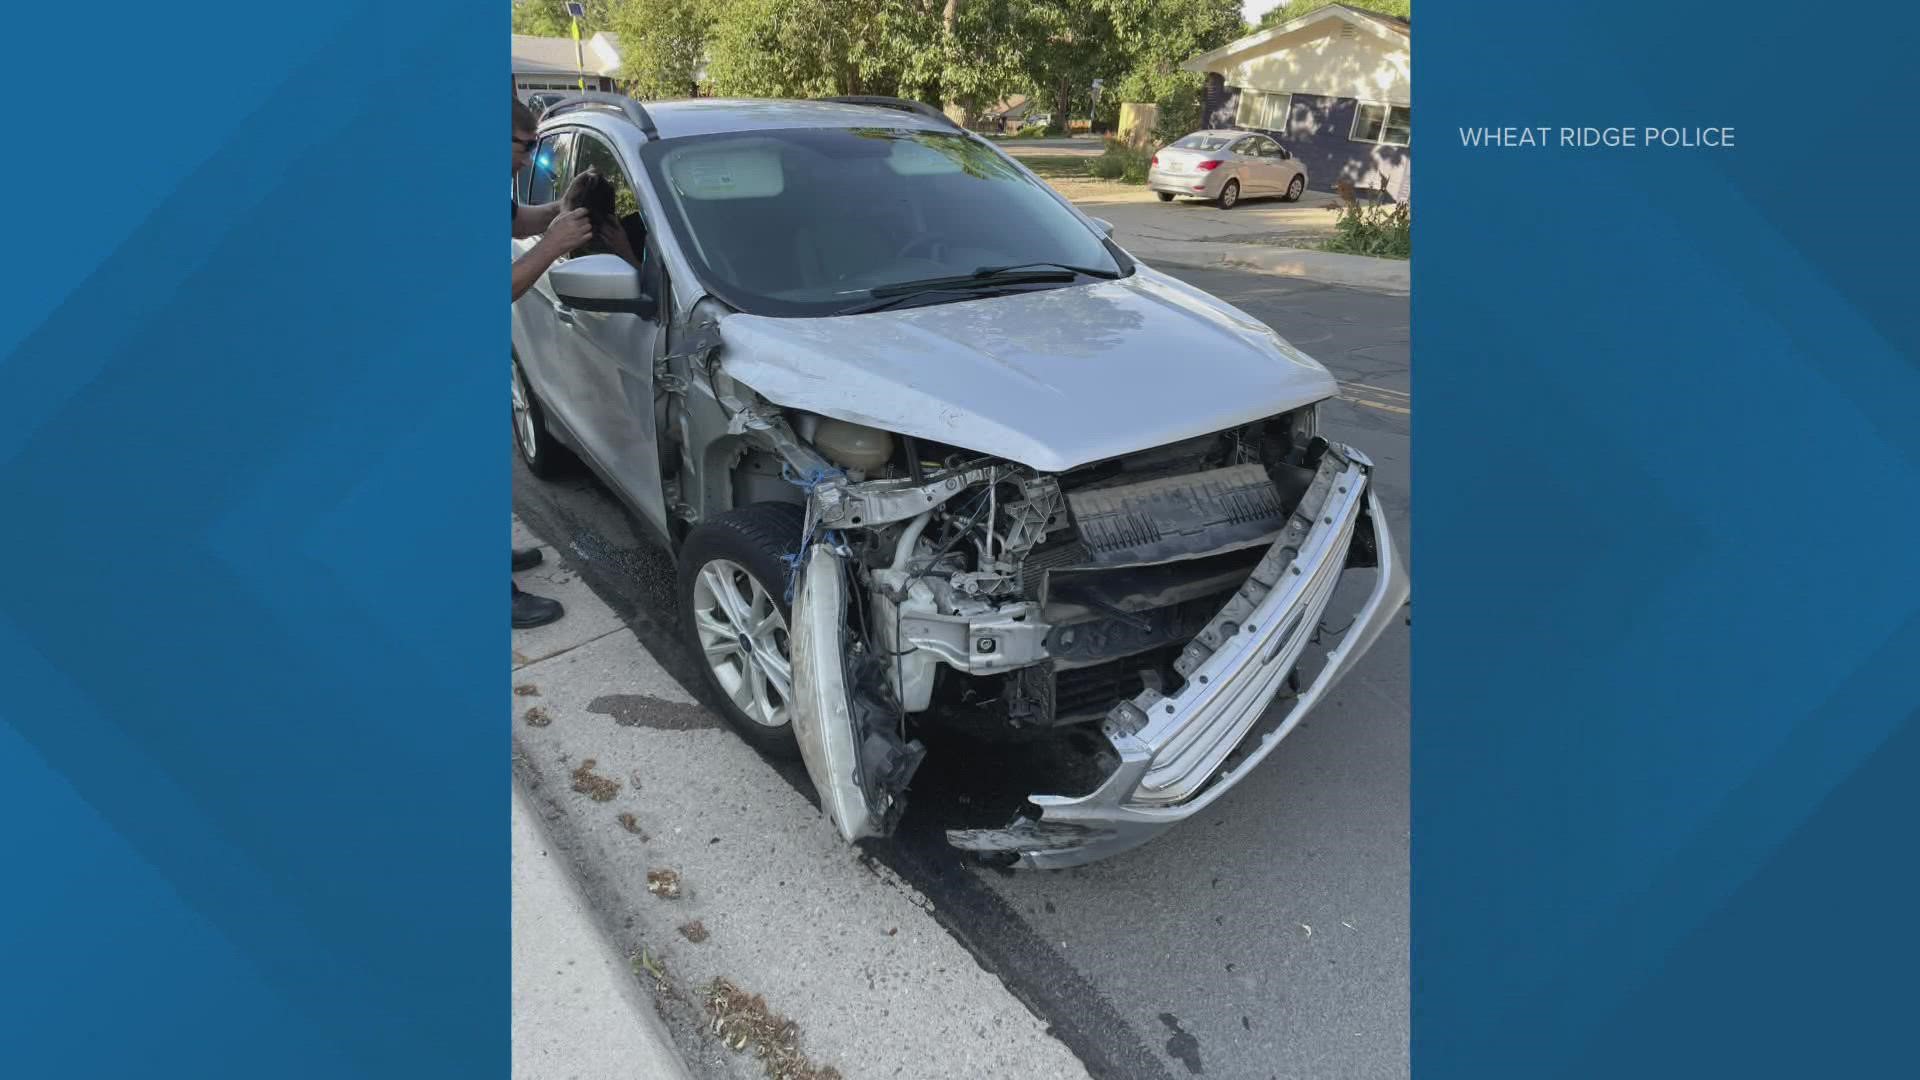 Wheat Ridge Police recovered the car that drove off, but the driver and passenger fled on foot – 38th Avenue was closed between Independence Ave. and Johnson Street.